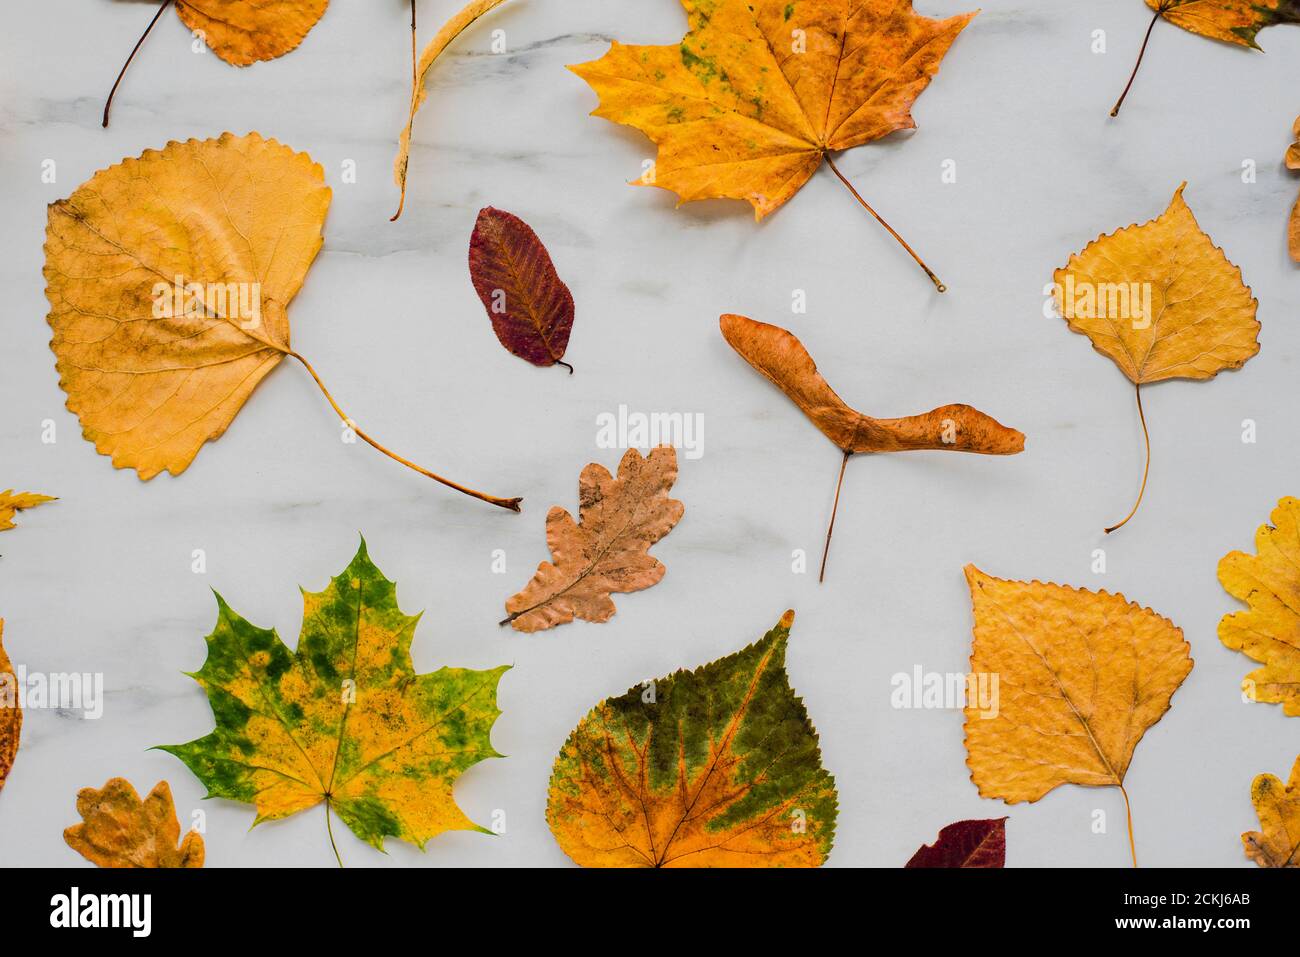 Colorful dry Autumn leaves on marble background. Flat lay, top view Stock Photo